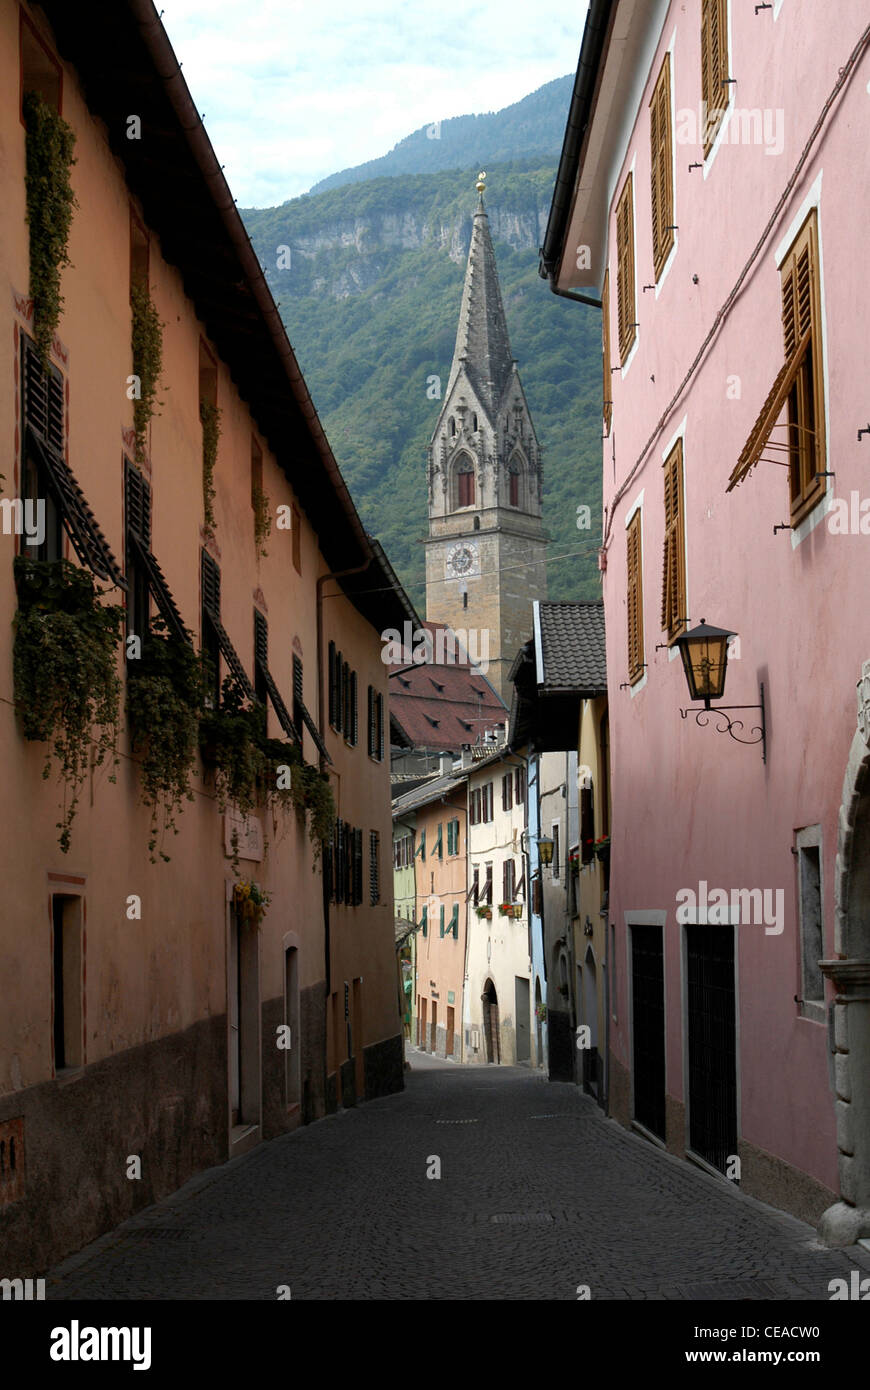 Old lane in Tramin at the South Tyrolean wine route with the Gothic Parish church from the 15th century. Stock Photo